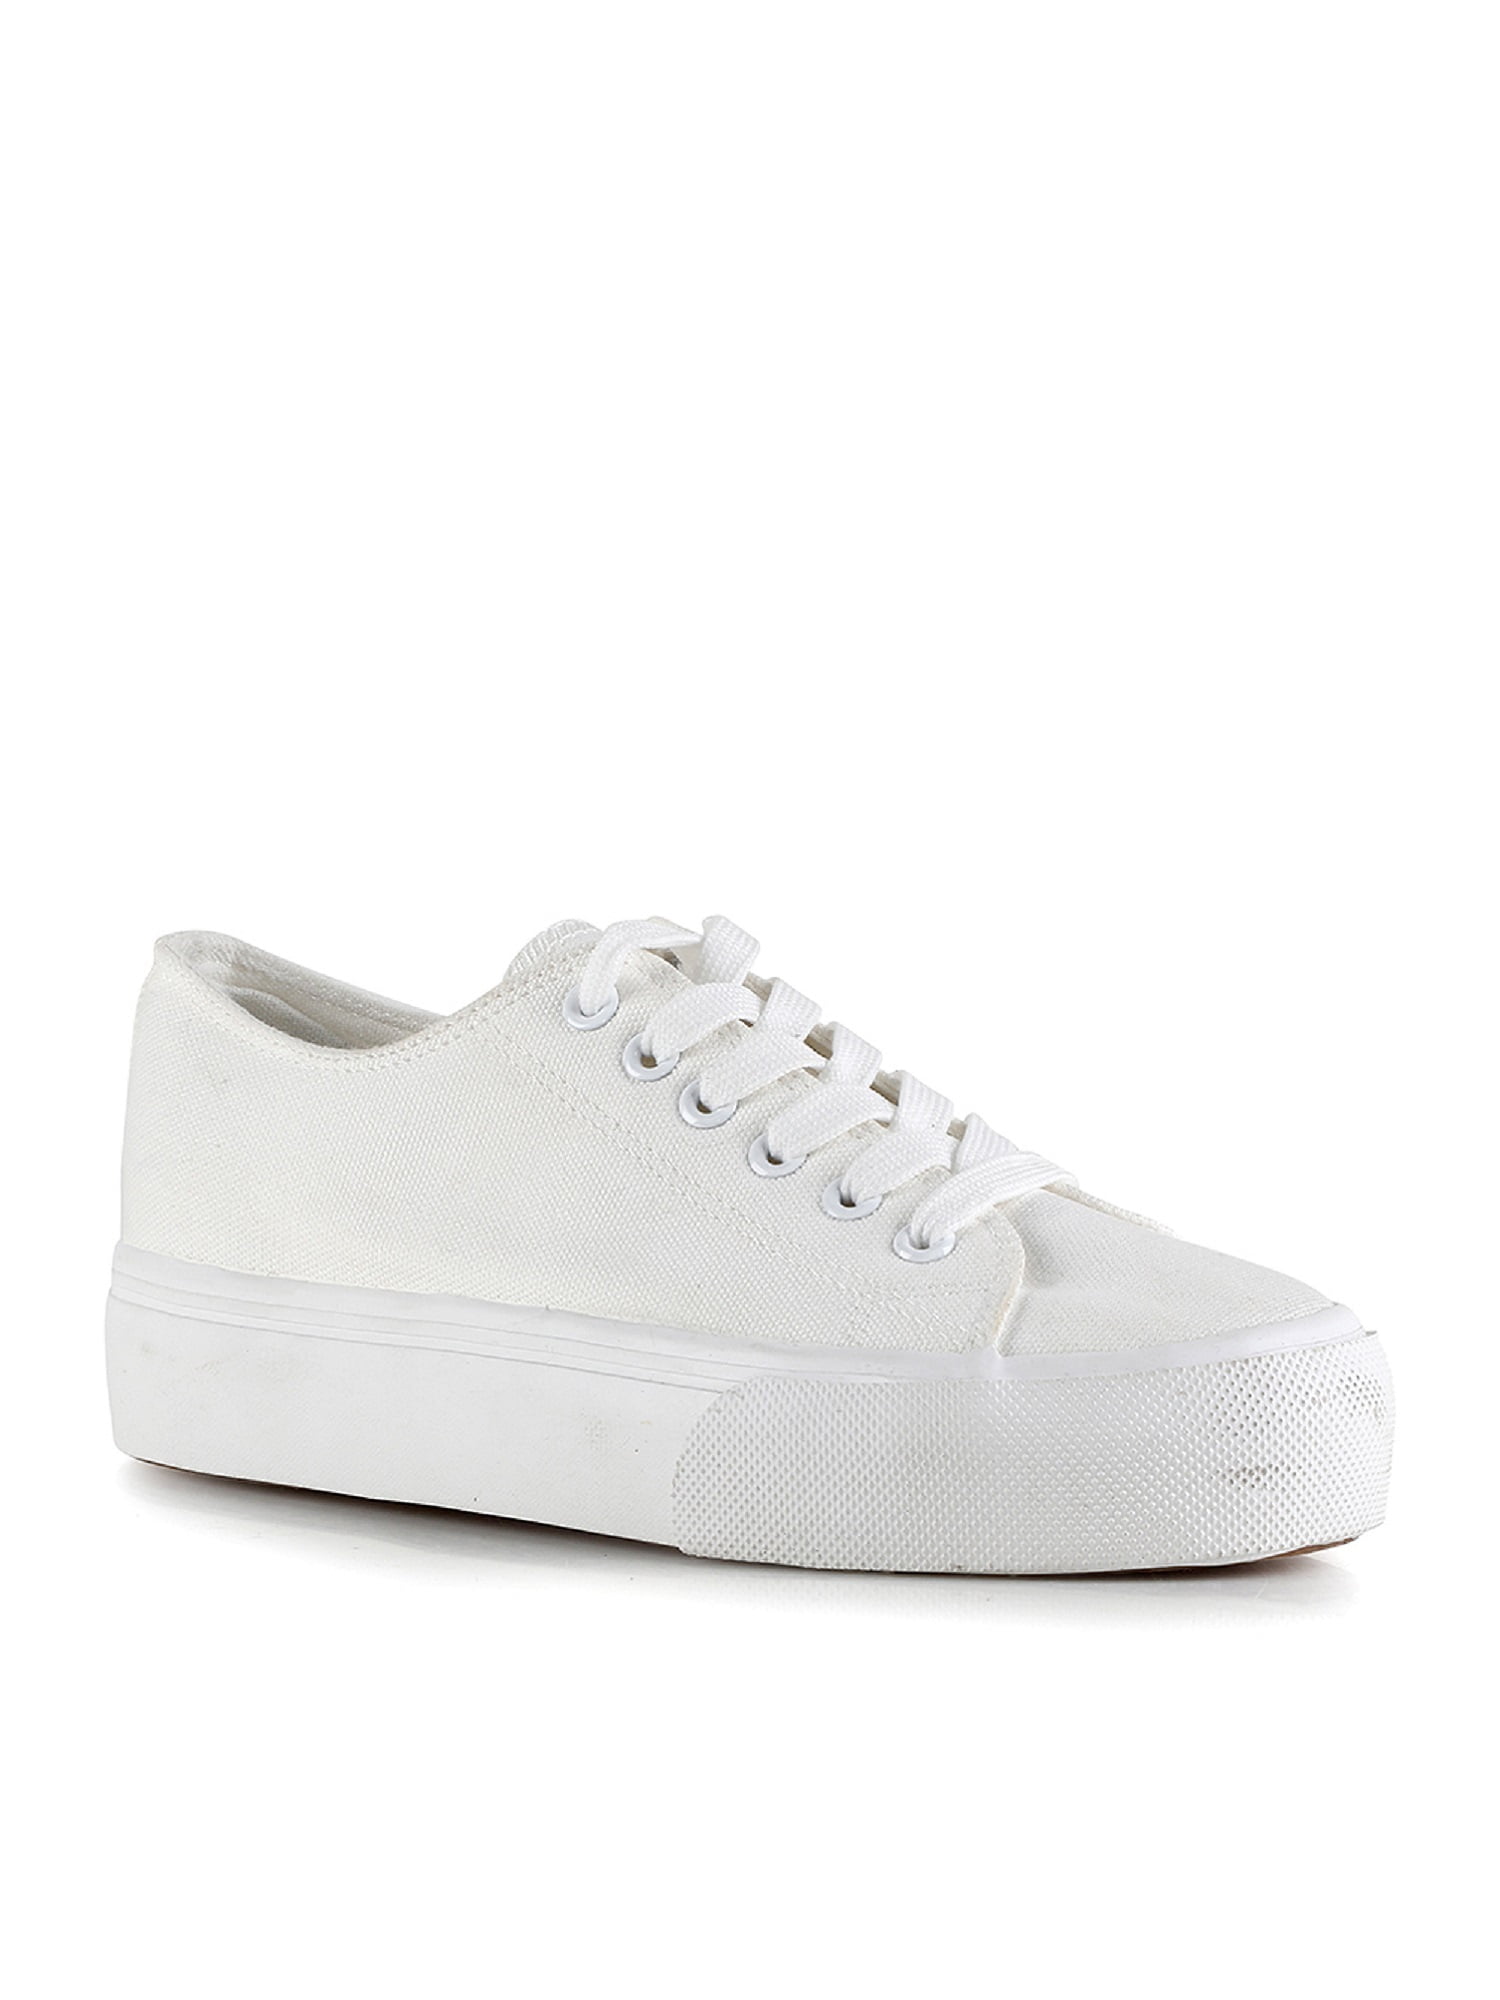 Lace Up Women's Canvas Sneakers in White - Walmart.com